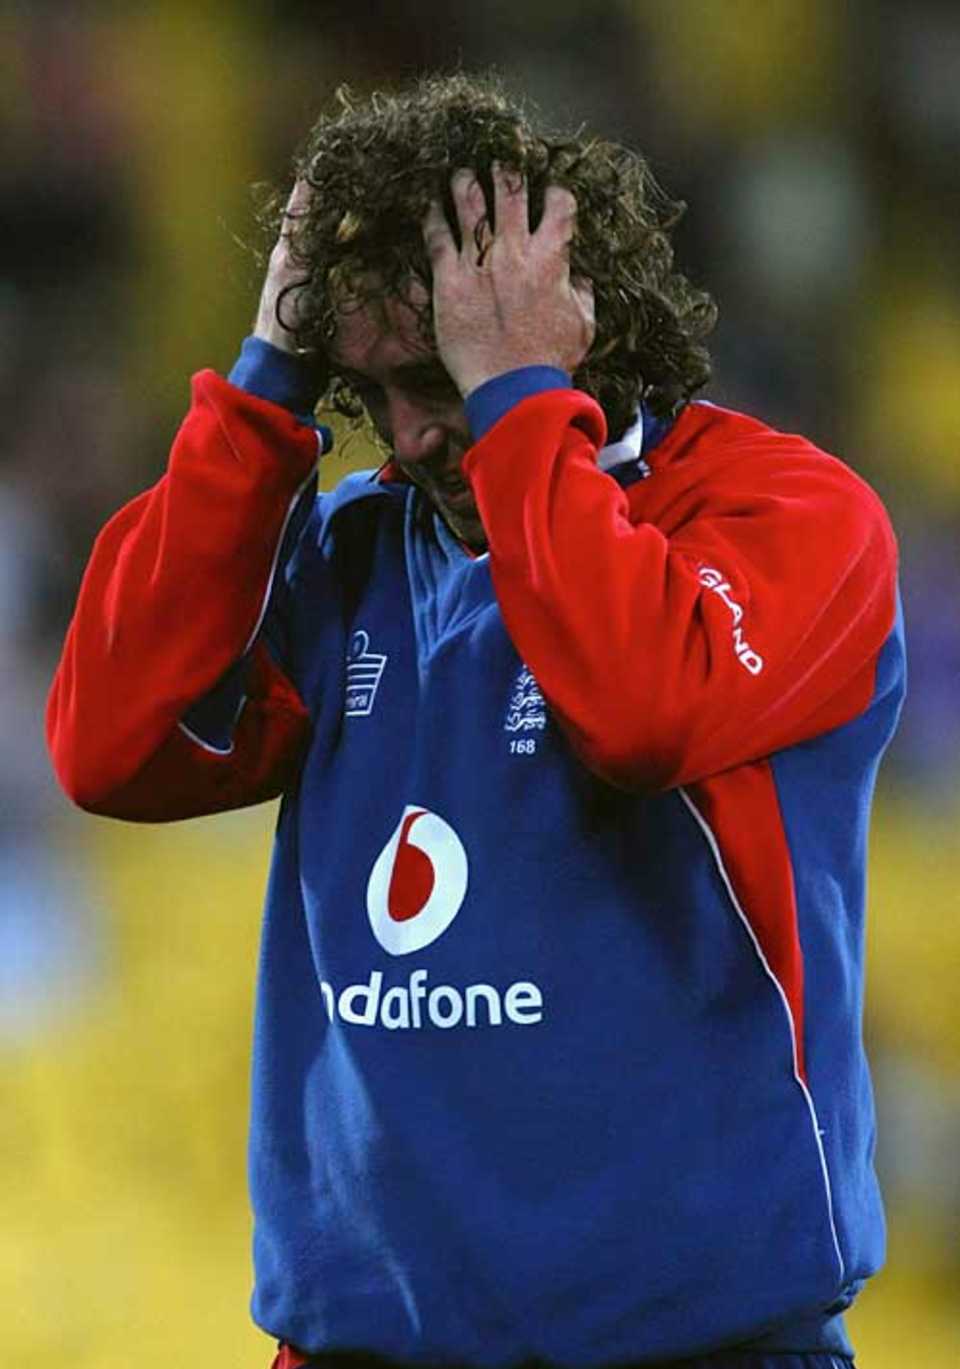 Pulling his out: Ryan Sidebottom shows his frustration